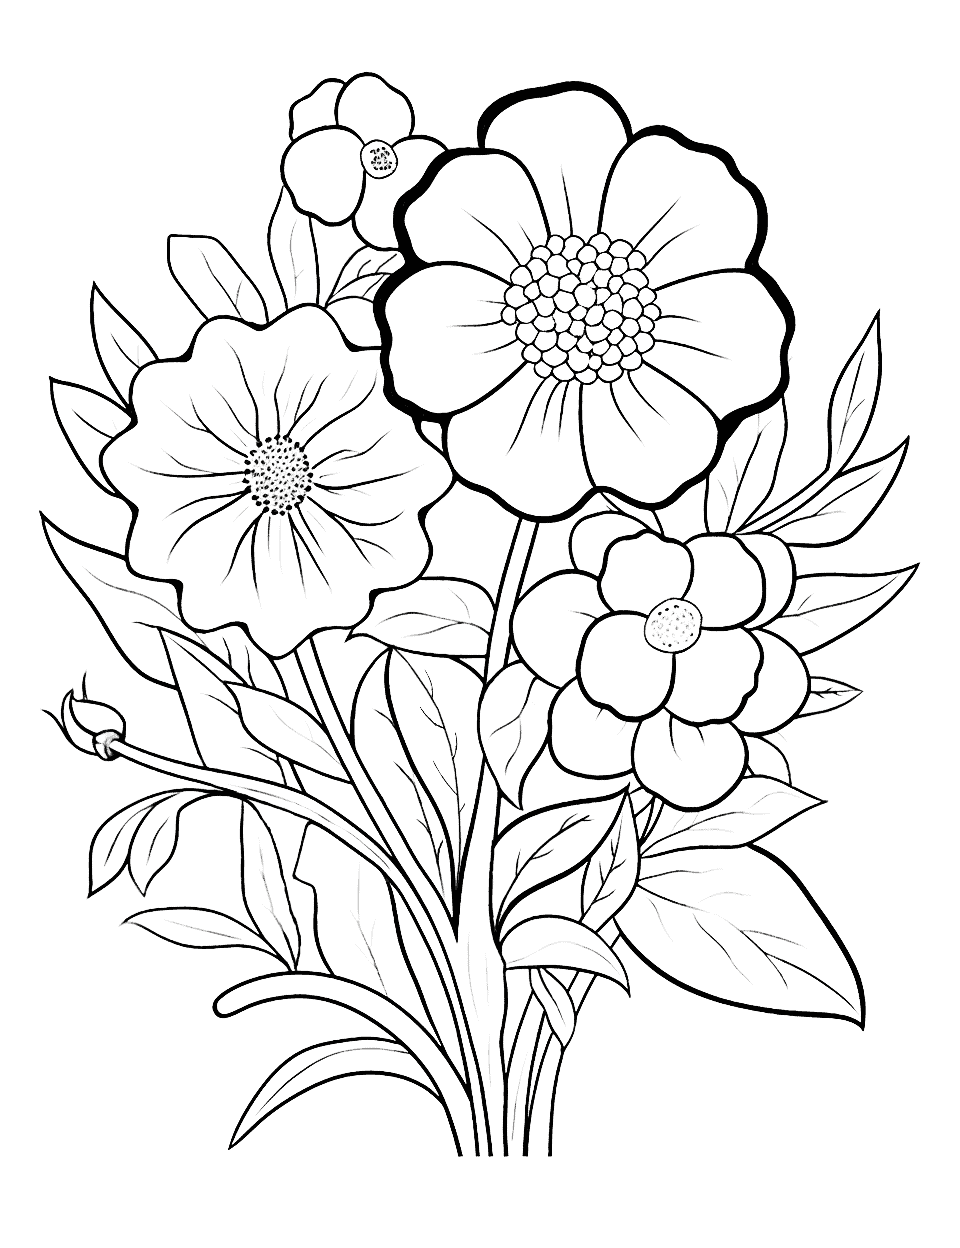 Cool Summer Blossoms Flower Coloring Page - A coloring page featuring a cool arrangement of summer flowers.